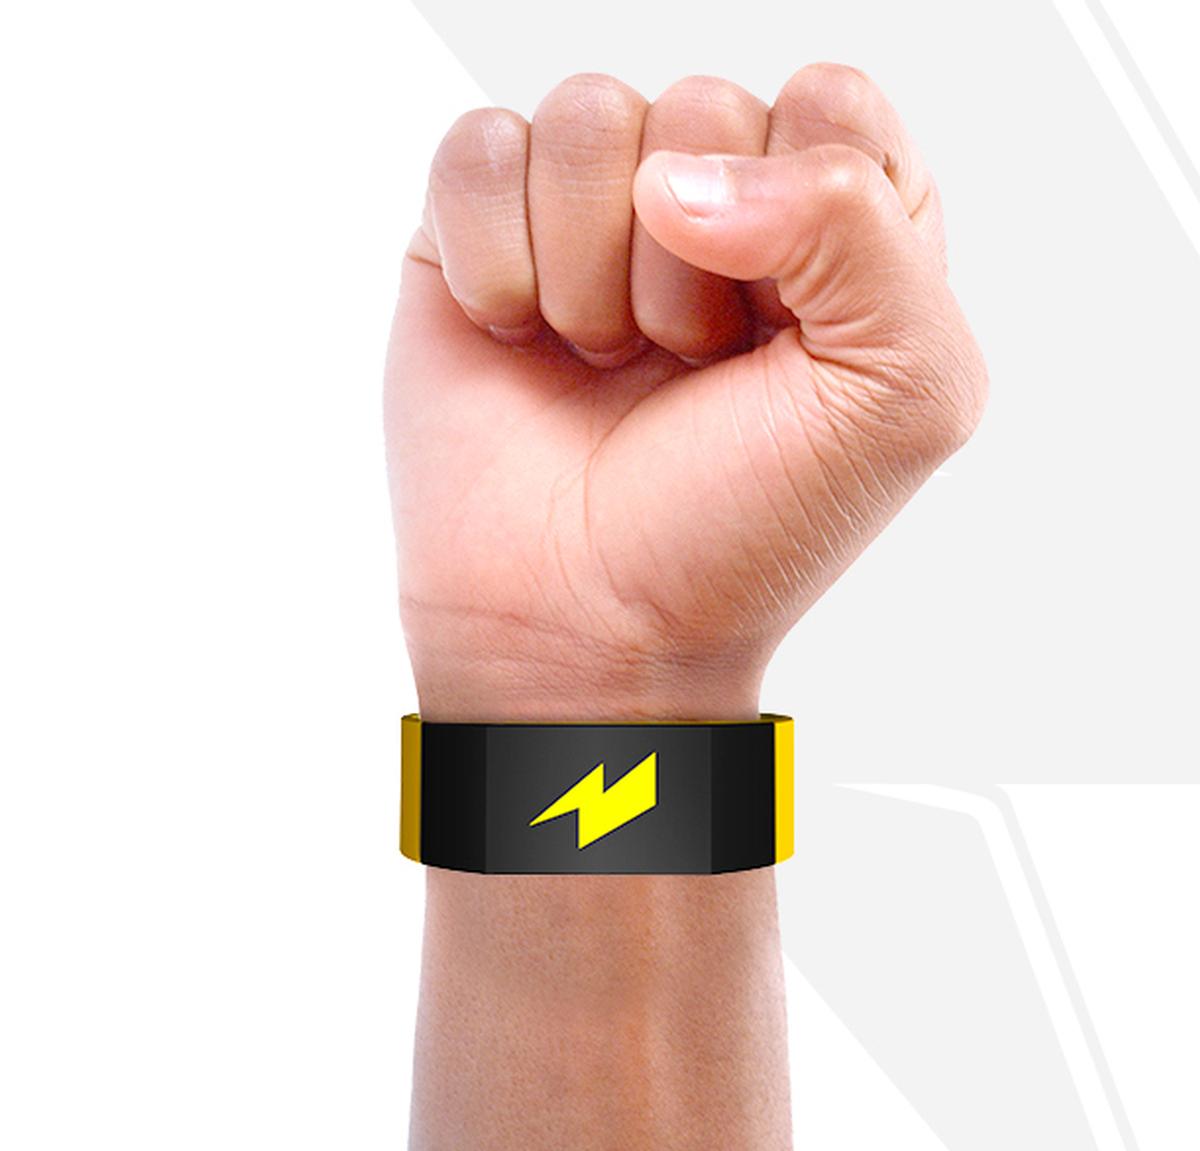 The prototype is now available for pre-order and is due to ship in 2015 / Pavlok